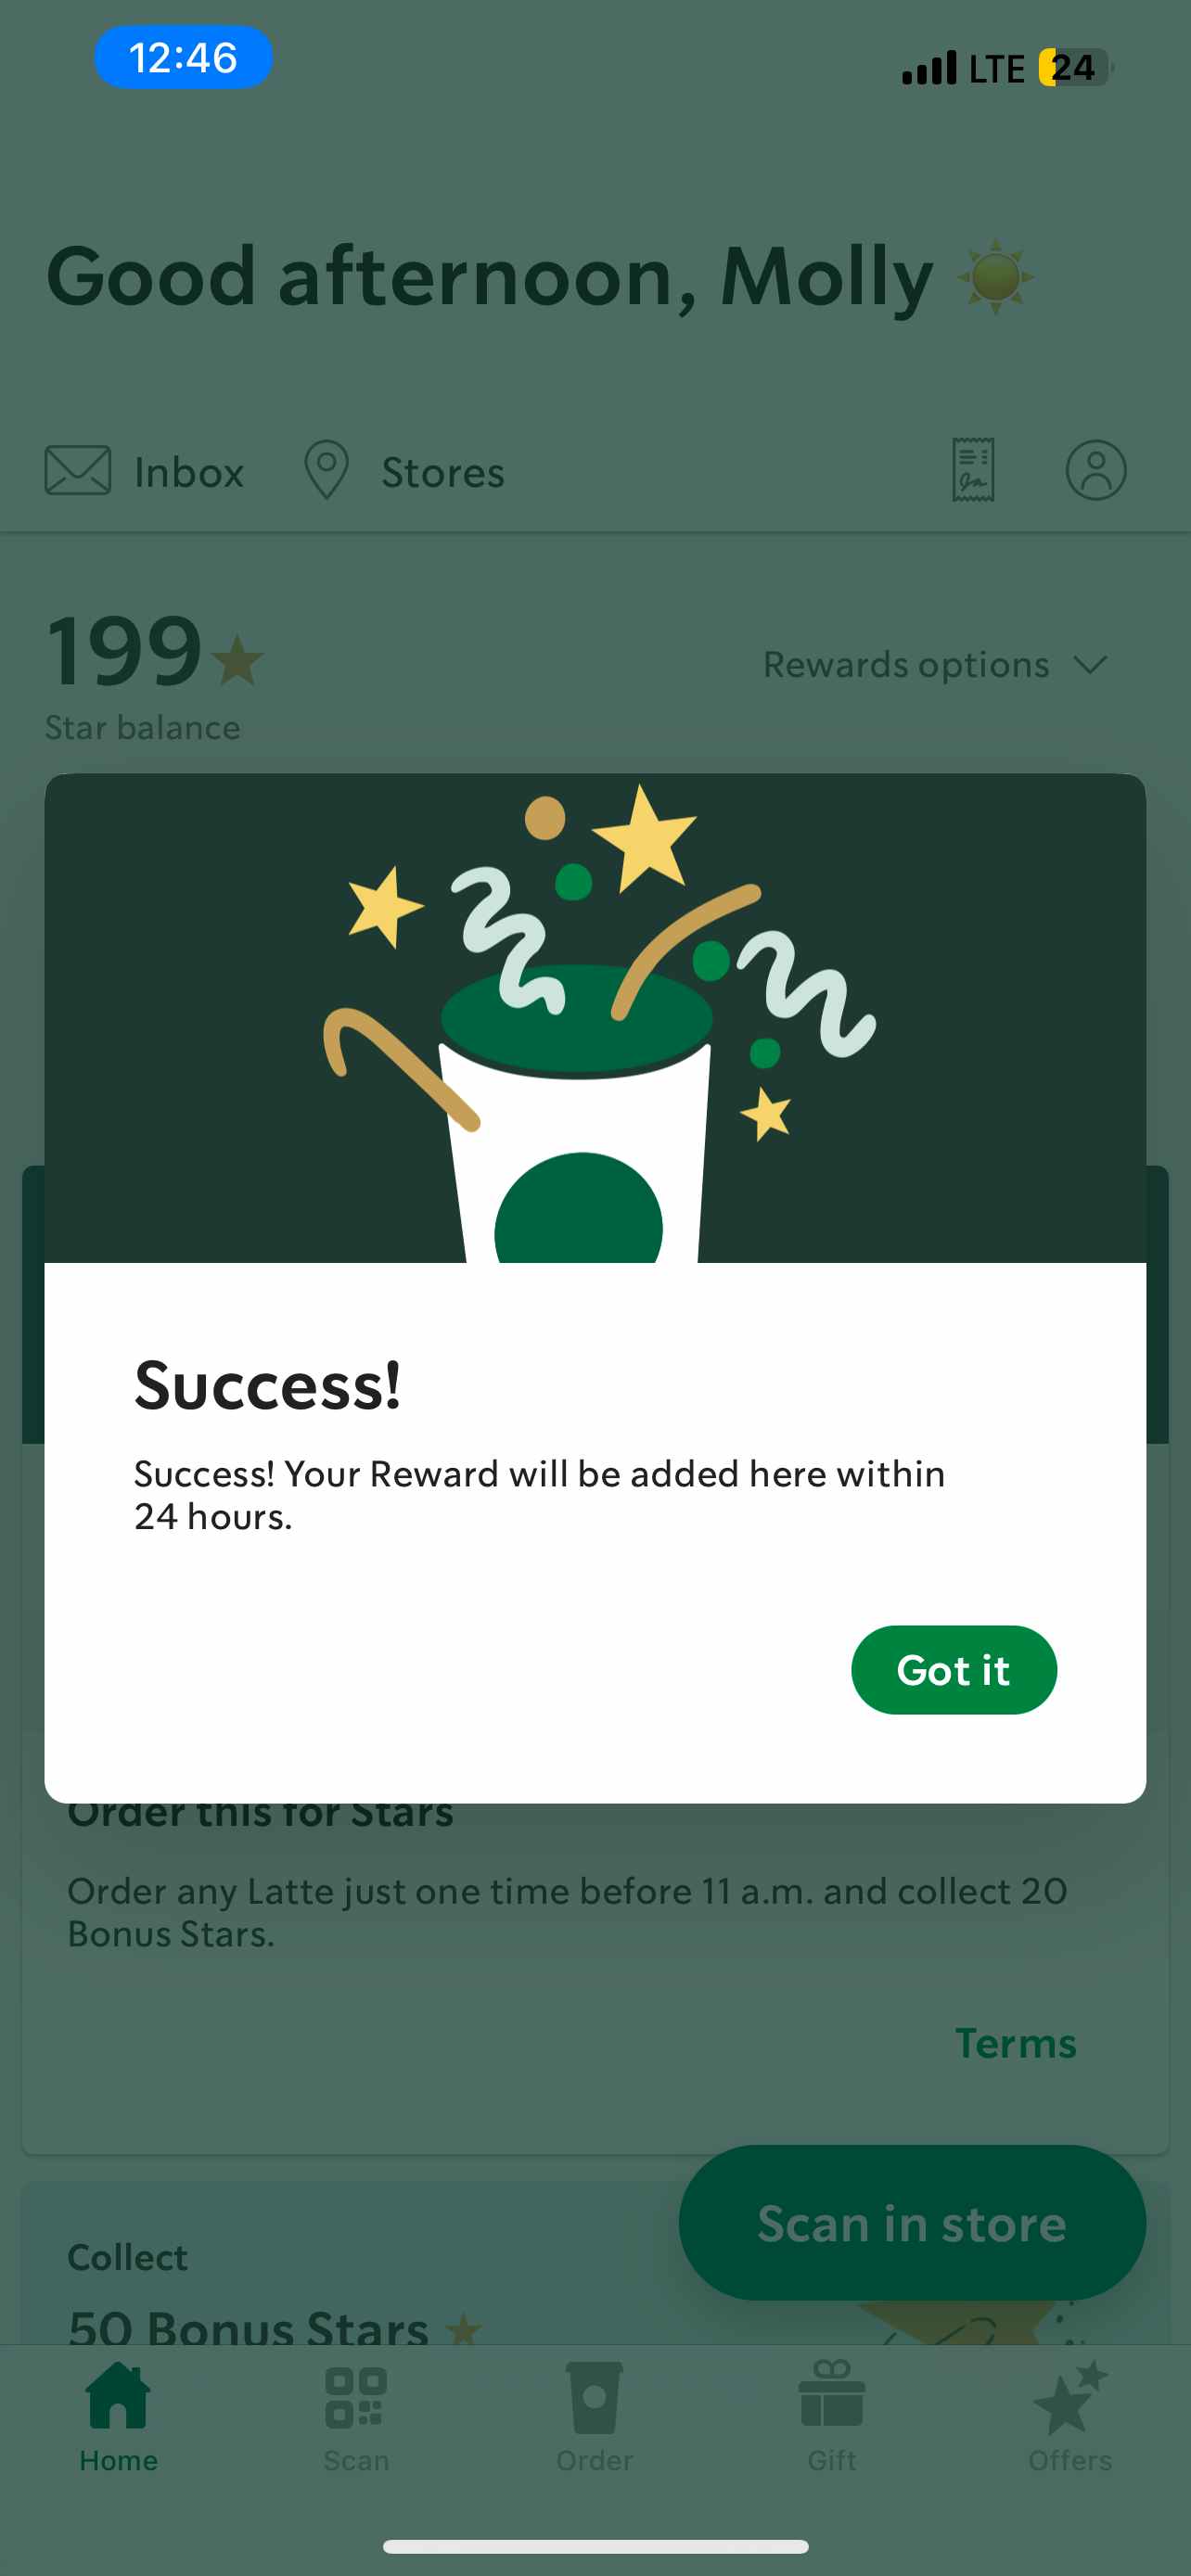 https://prod-cdn-thekrazycouponlady.imgix.net/wp-content/uploads/2019/04/free-starbucks-earth-day-2023-1682193331-1682193331.png?auto=format&fit=fill&q=25